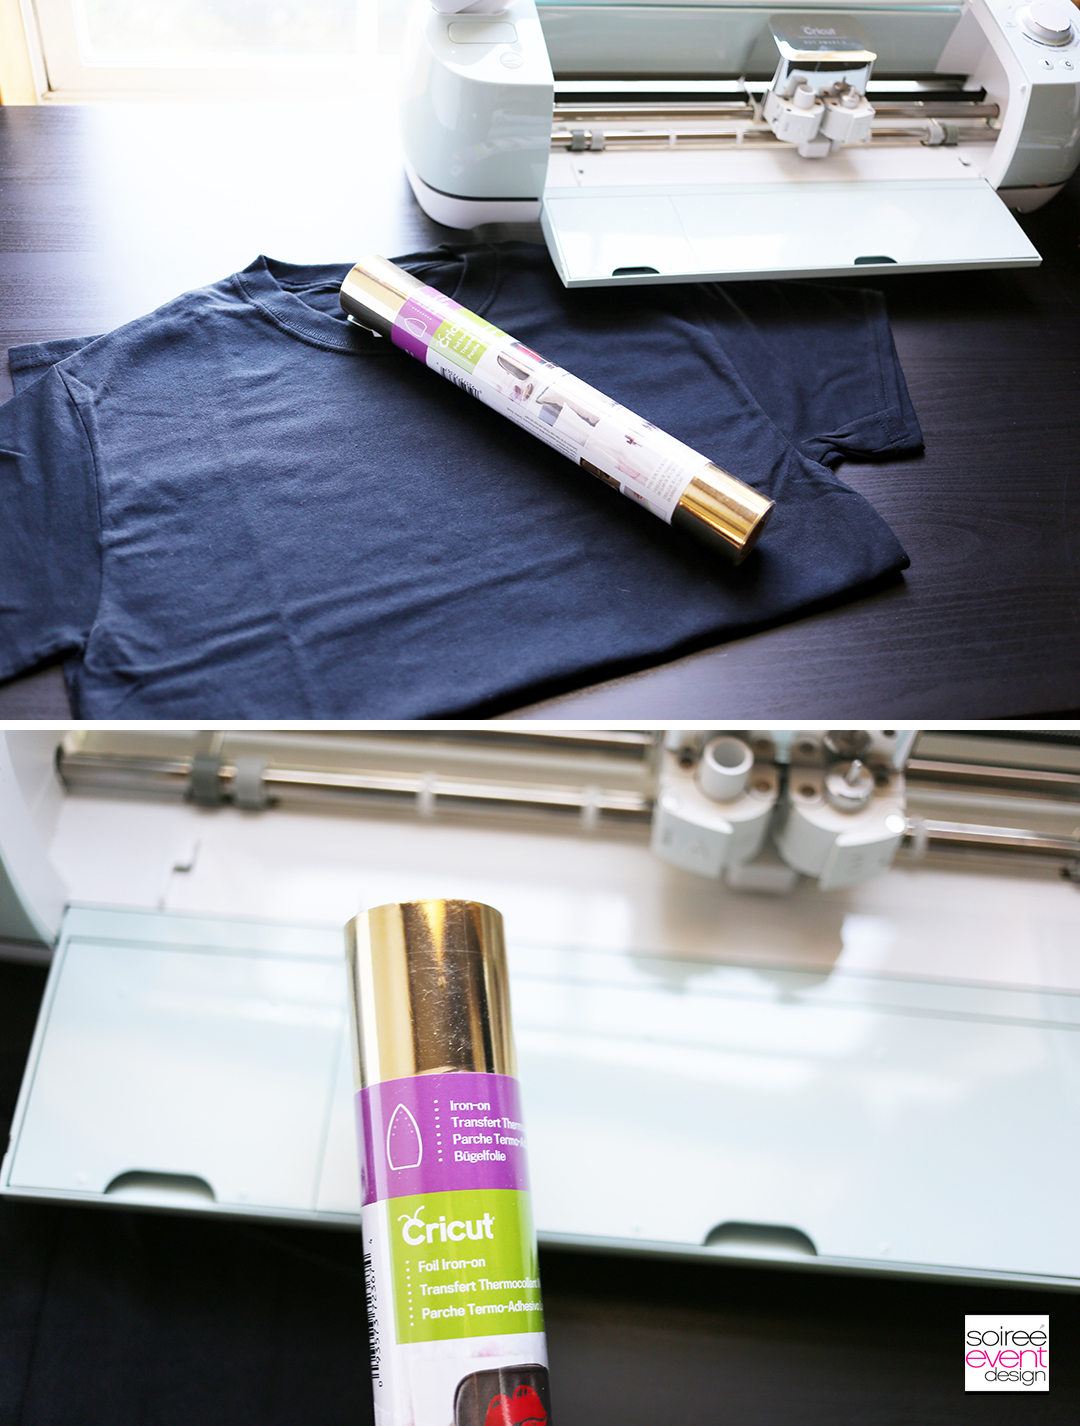 Make Tshirts with Cricut for Sweet 16 Party - supplies